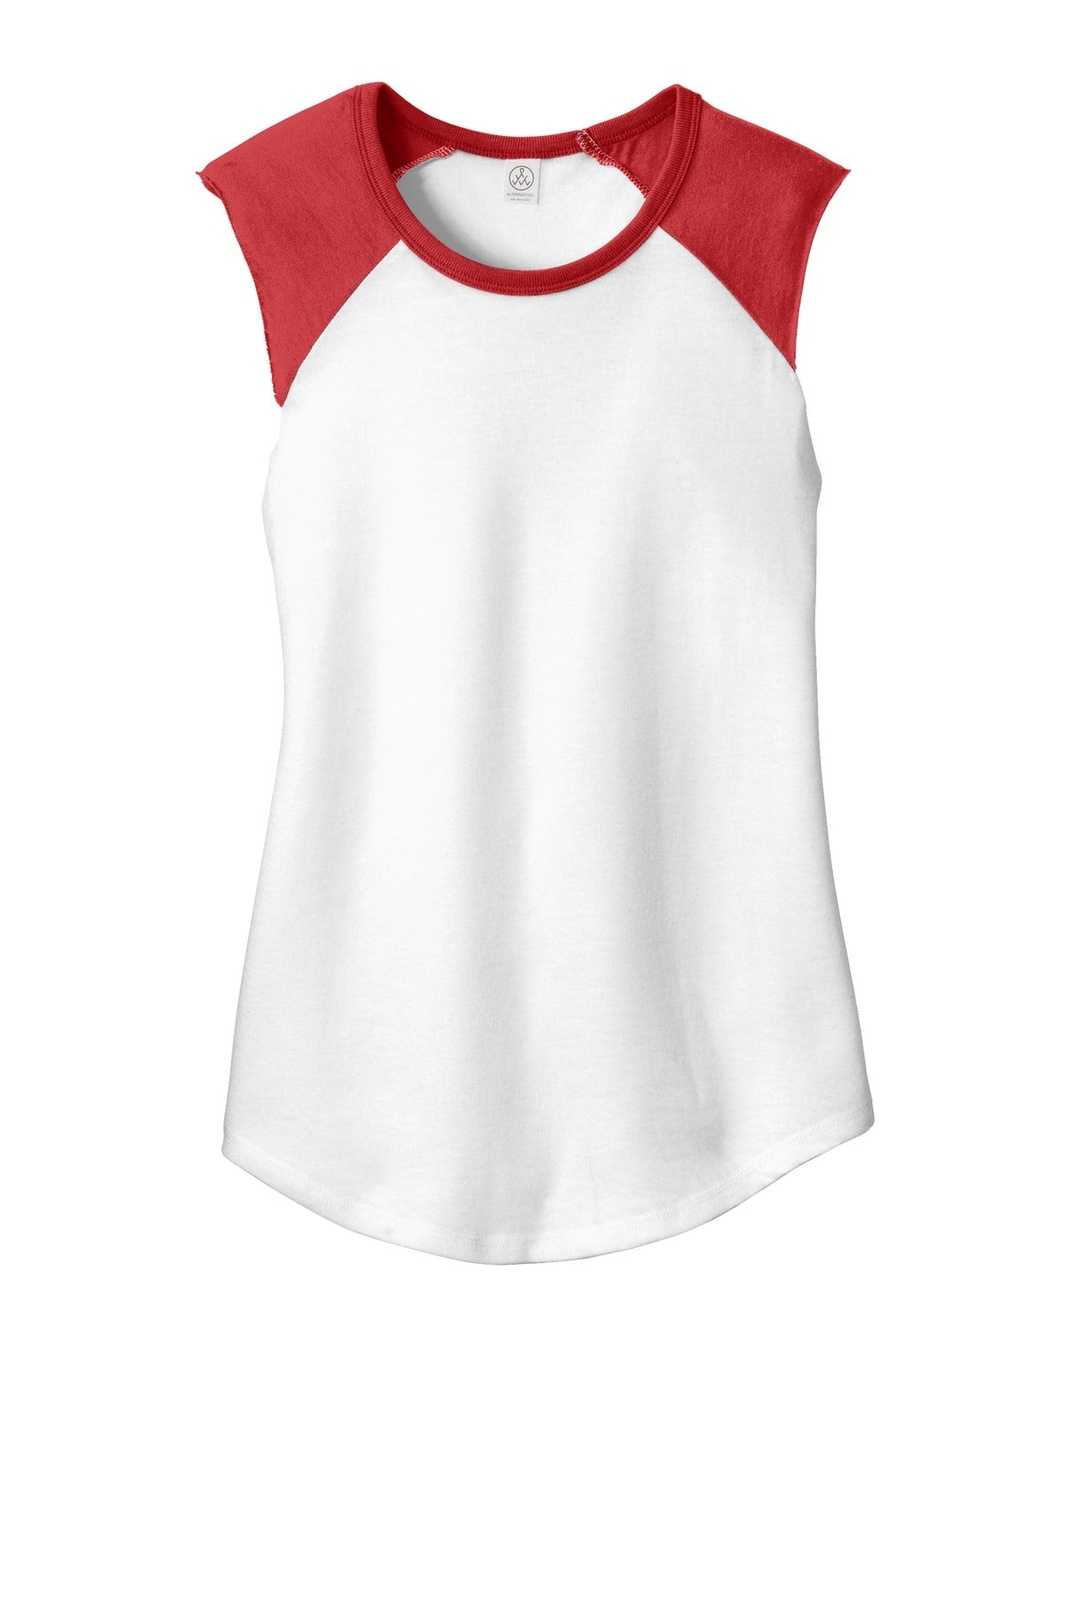 Alternative AA5104 Women&#39;s Team Player Vintage 50/50 Tee - White Red - HIT a Double - 2